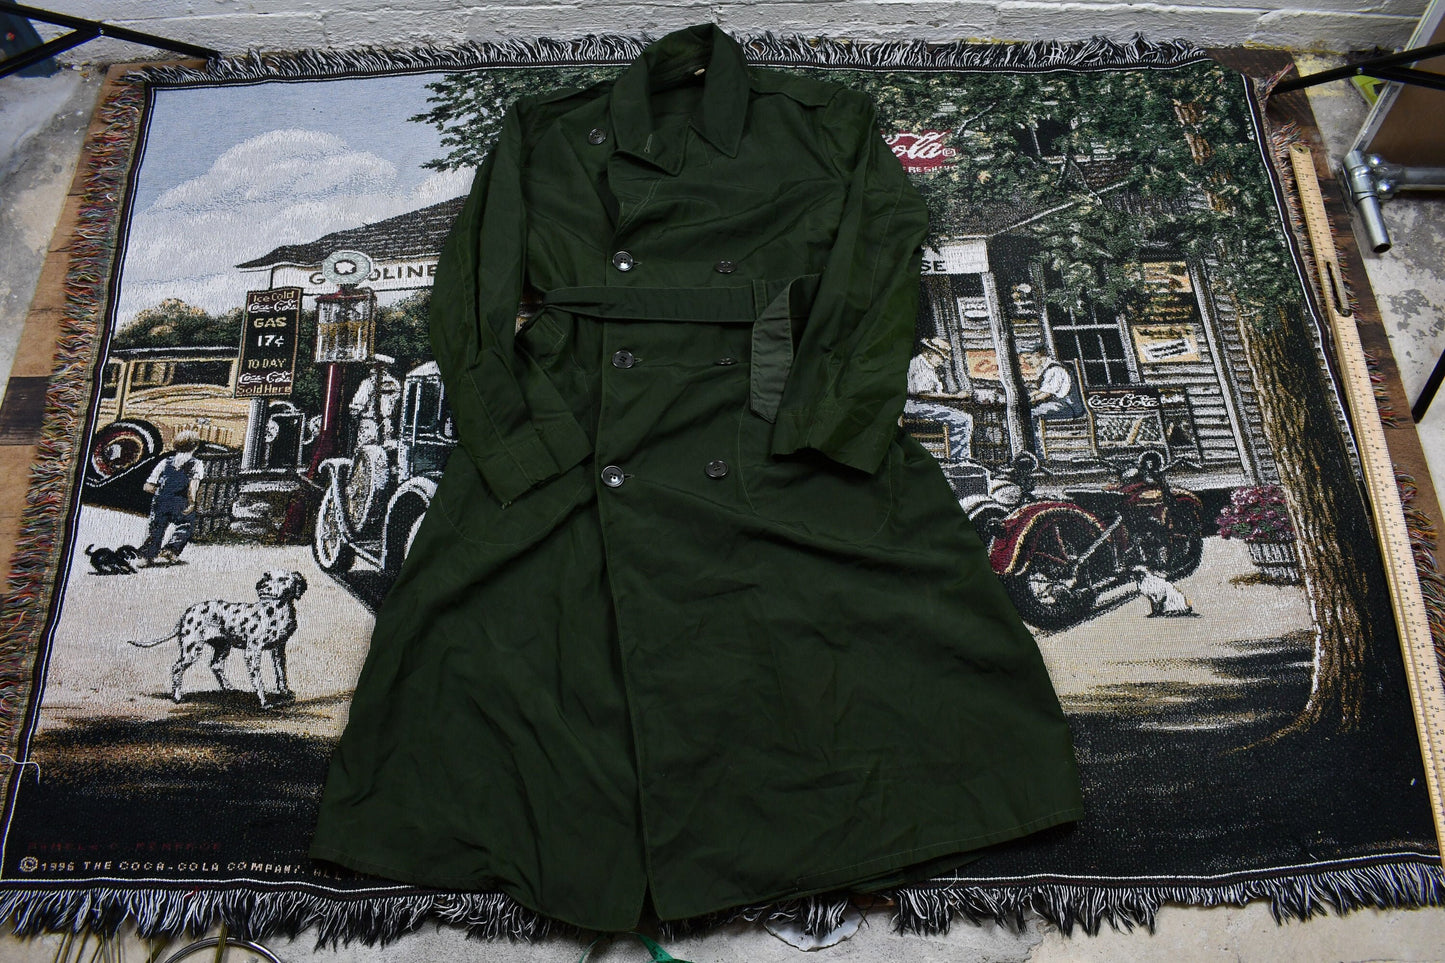 Vintage 1950s US Army Raincoat Size 36R / Military Apparel / Overcoat / True Vintage / Army Jacket / Historical / Formal Wear